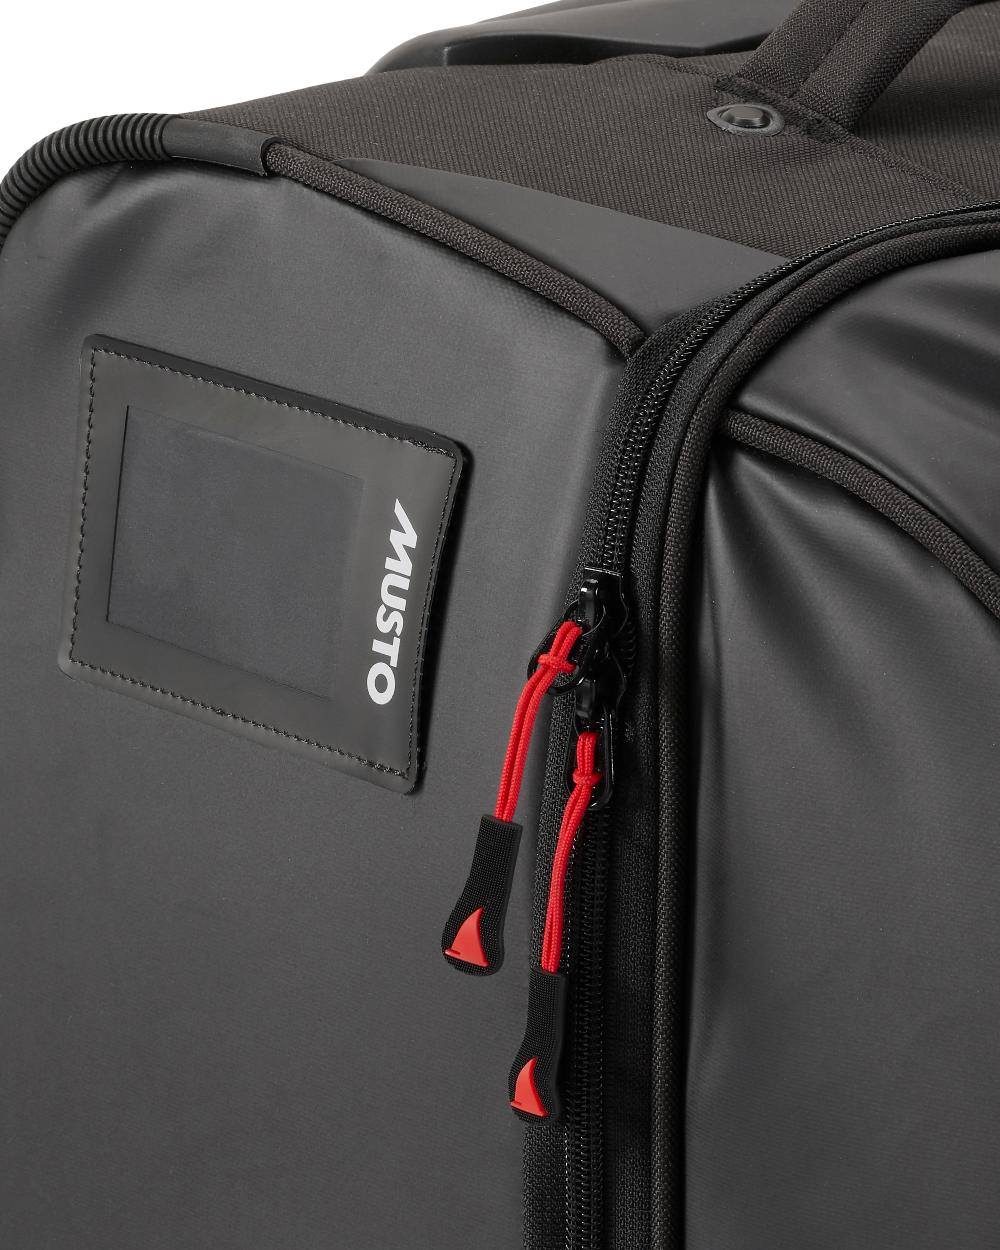 Black Coloured Musto 80L Wheeled Trolley Bag On A White Background